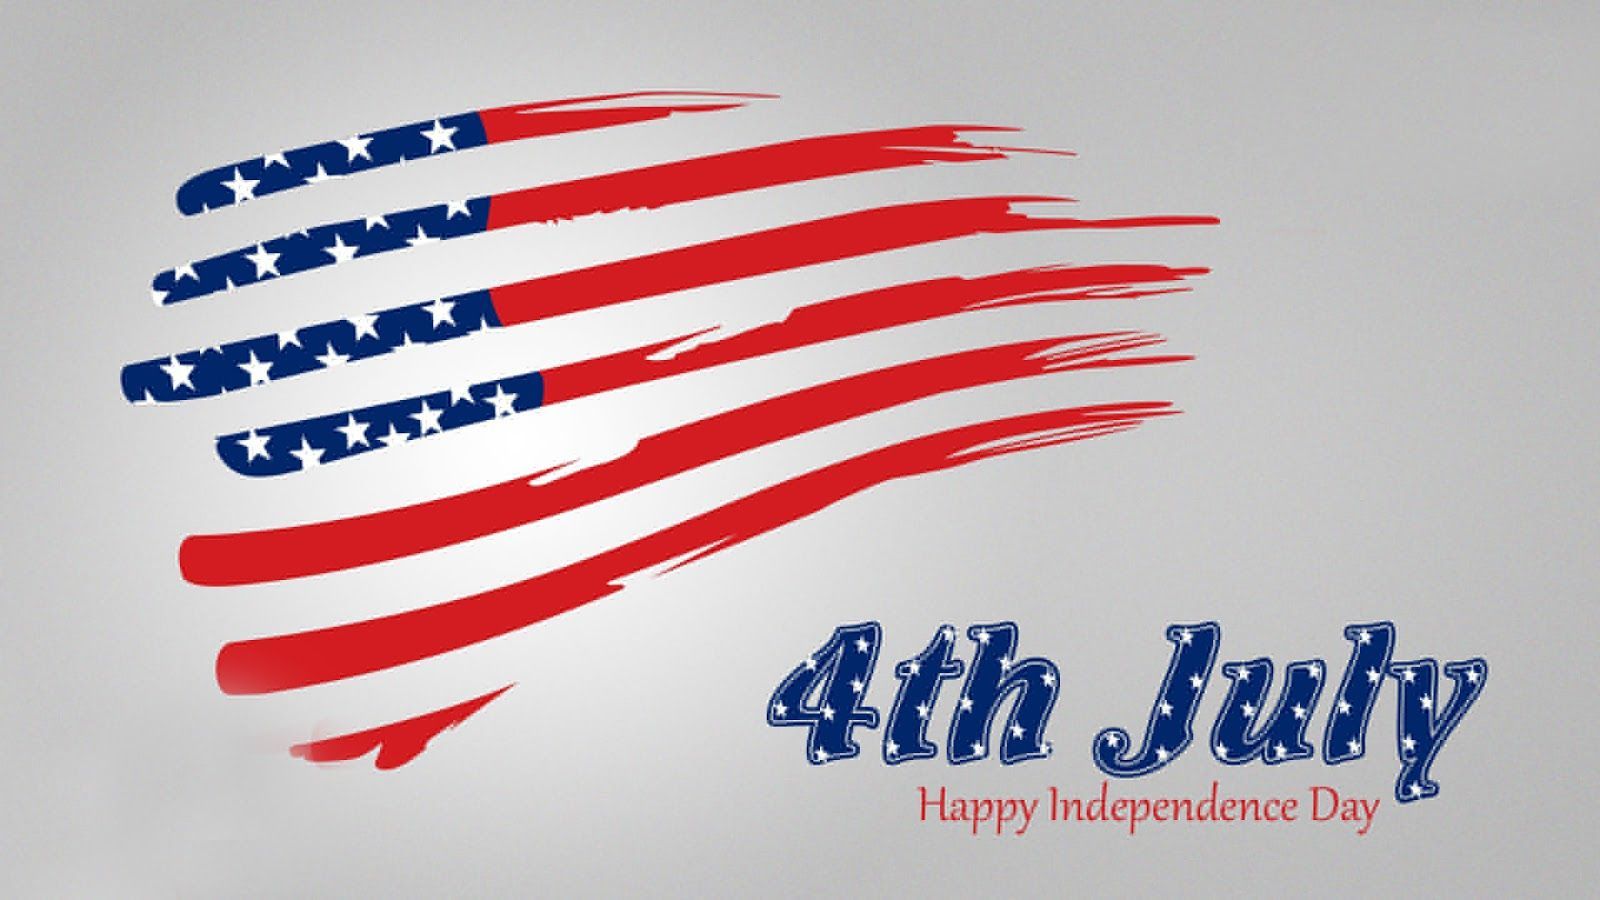 Happy 4th of July 2015 independence day